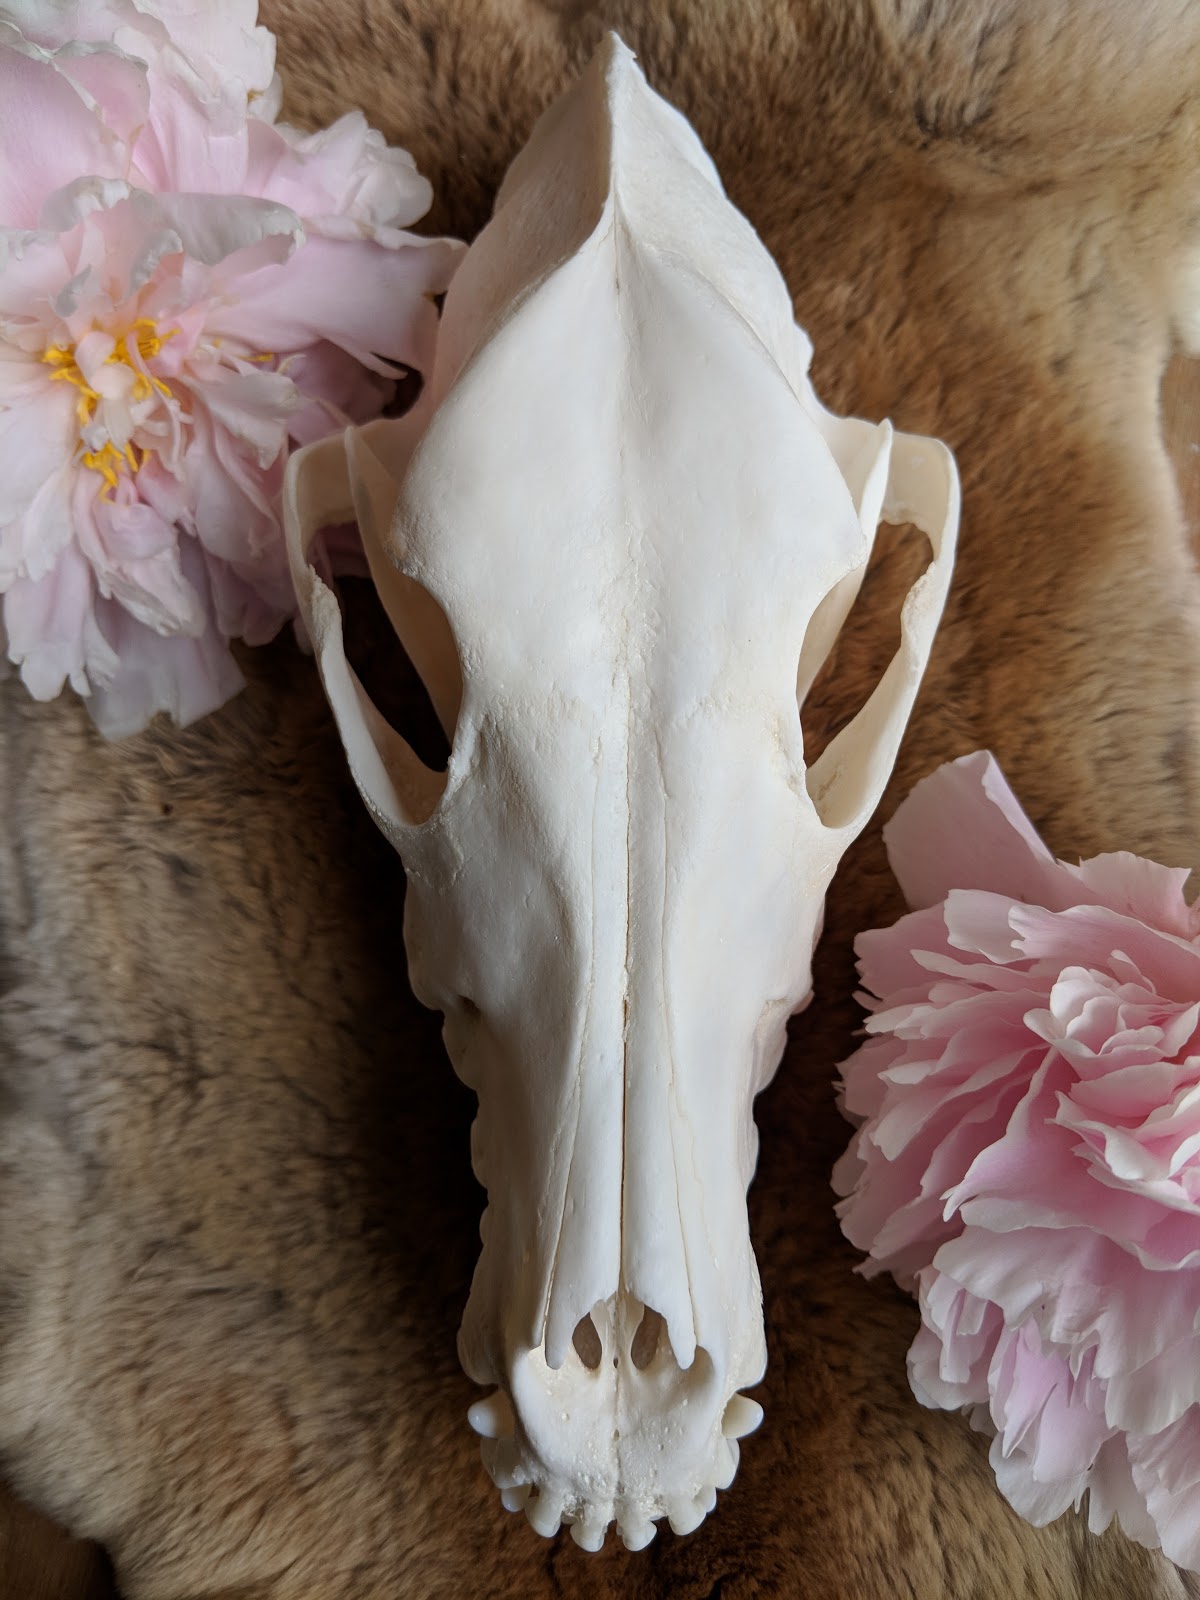 on-growing-my-cleaning-animal-skulls-business-by-30